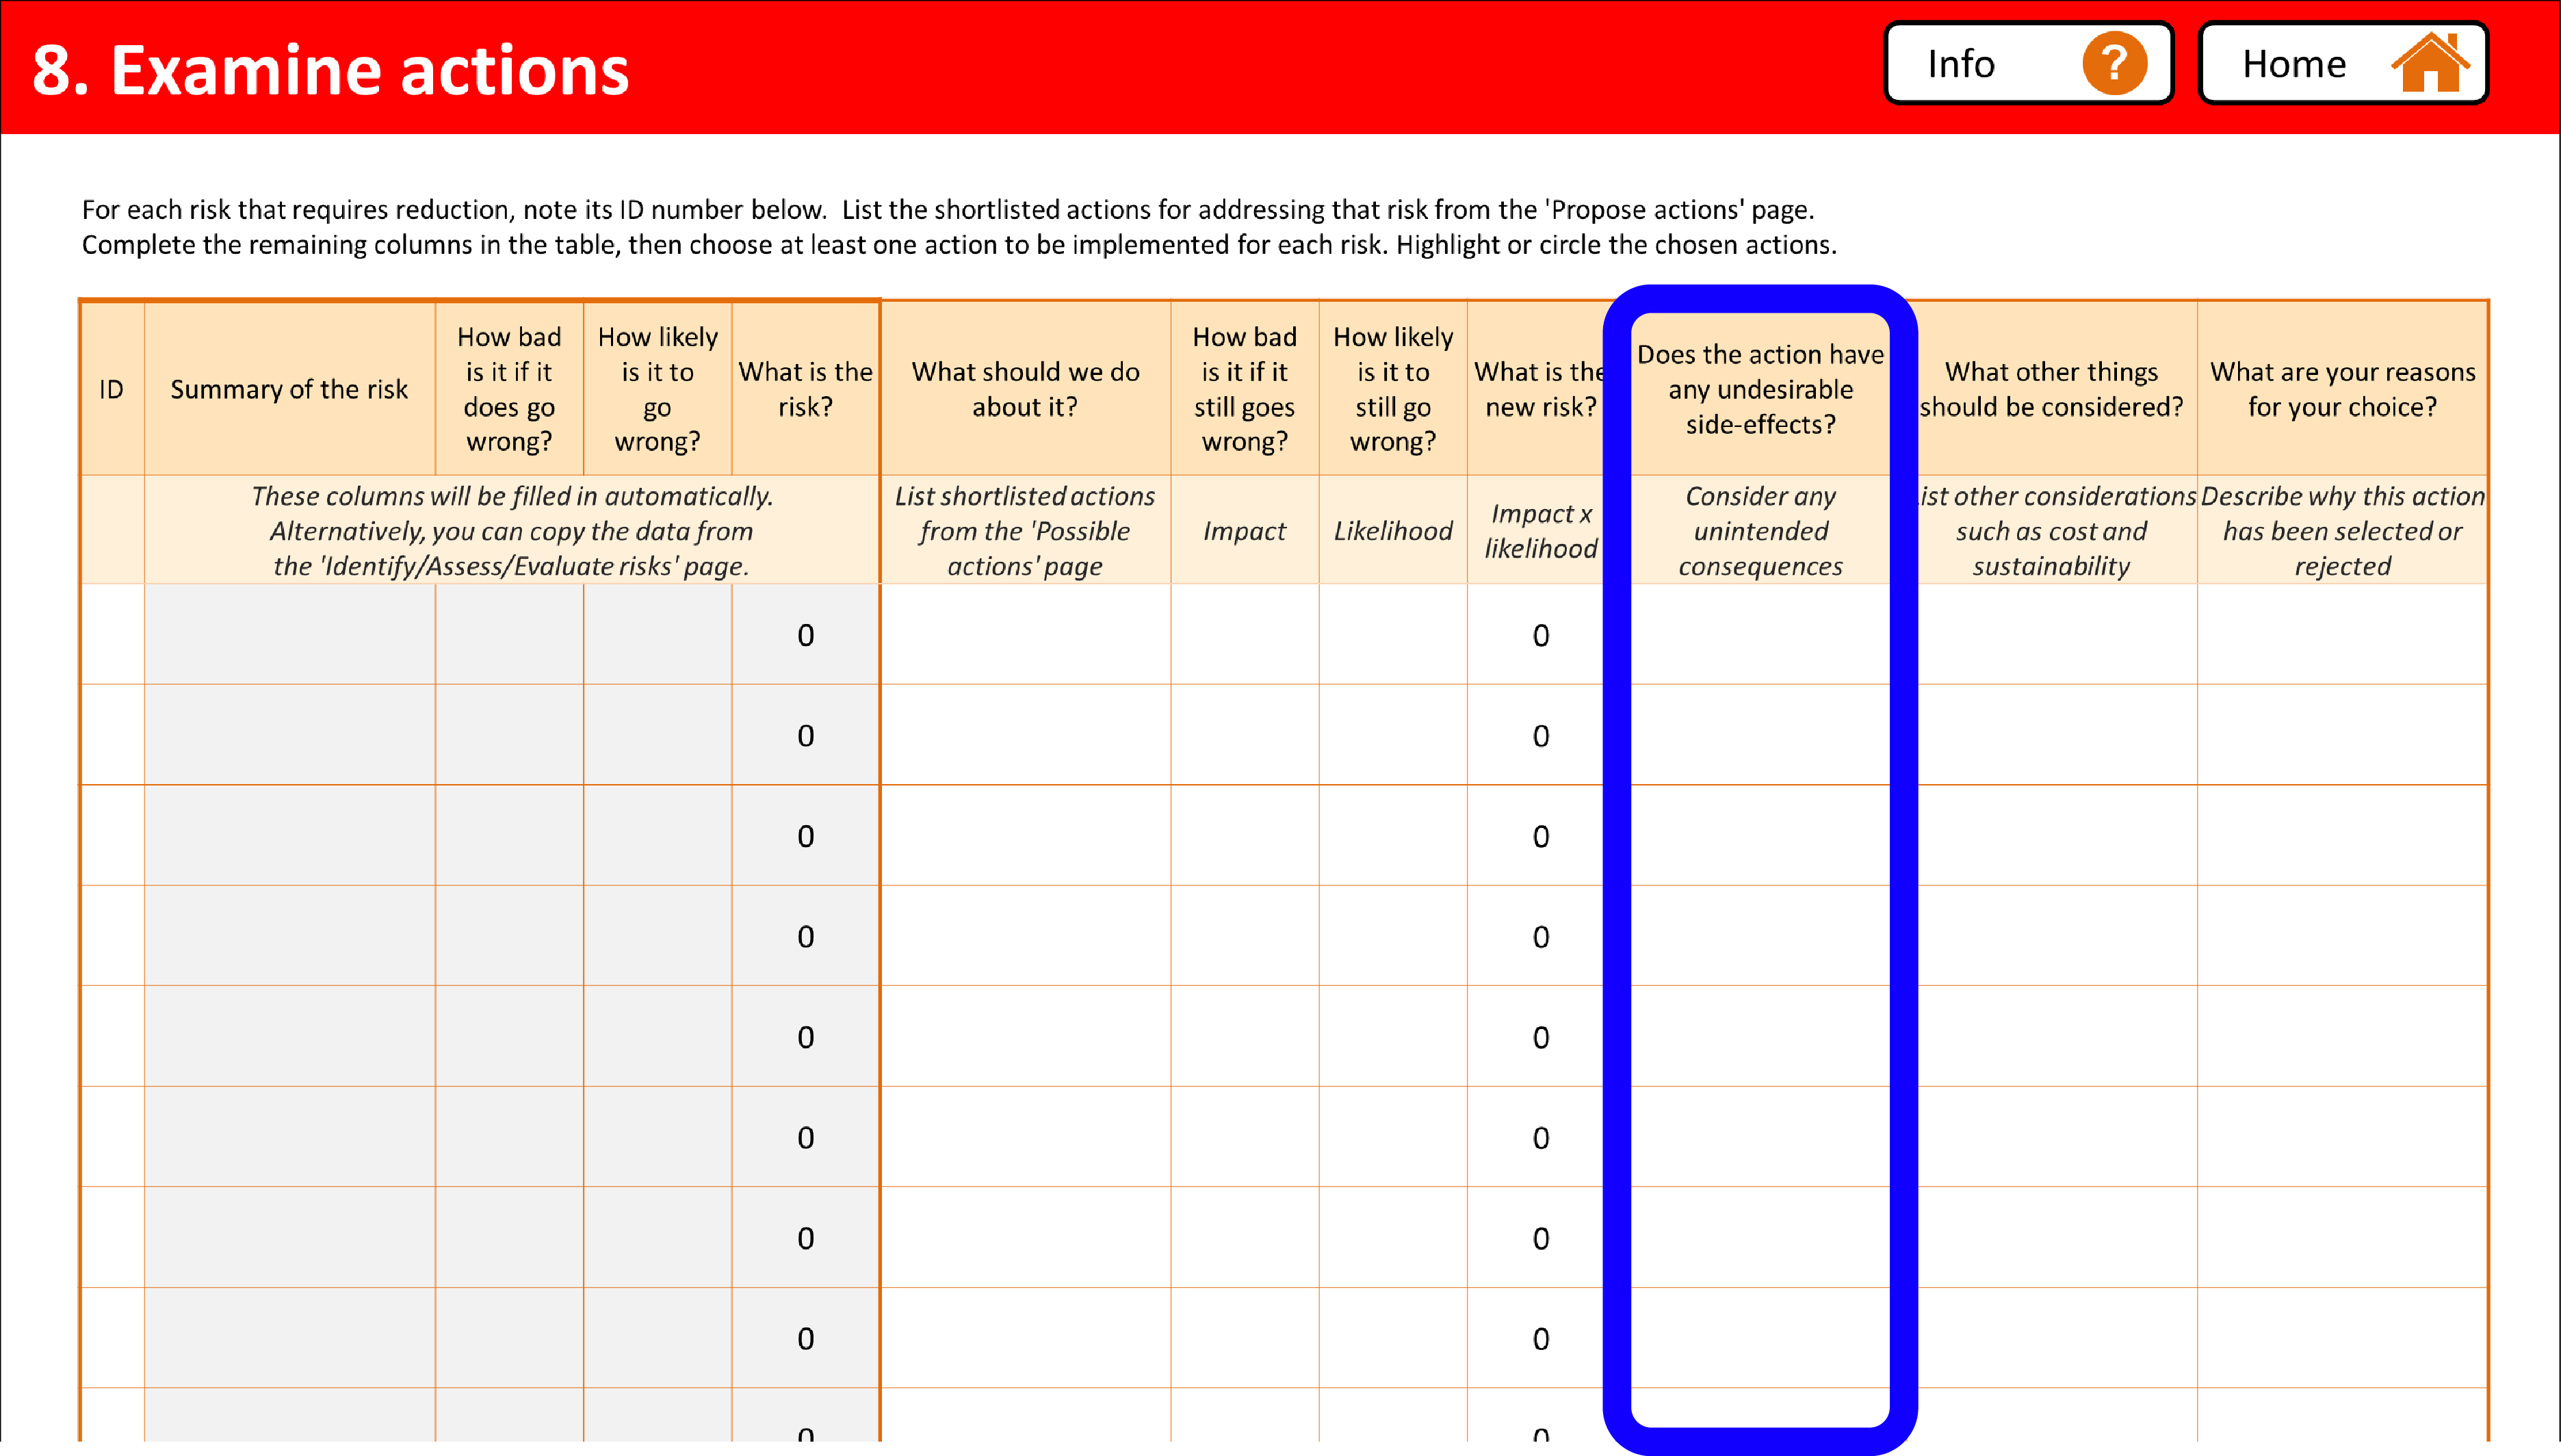 Screenshot of Examine actions page from the assessment form